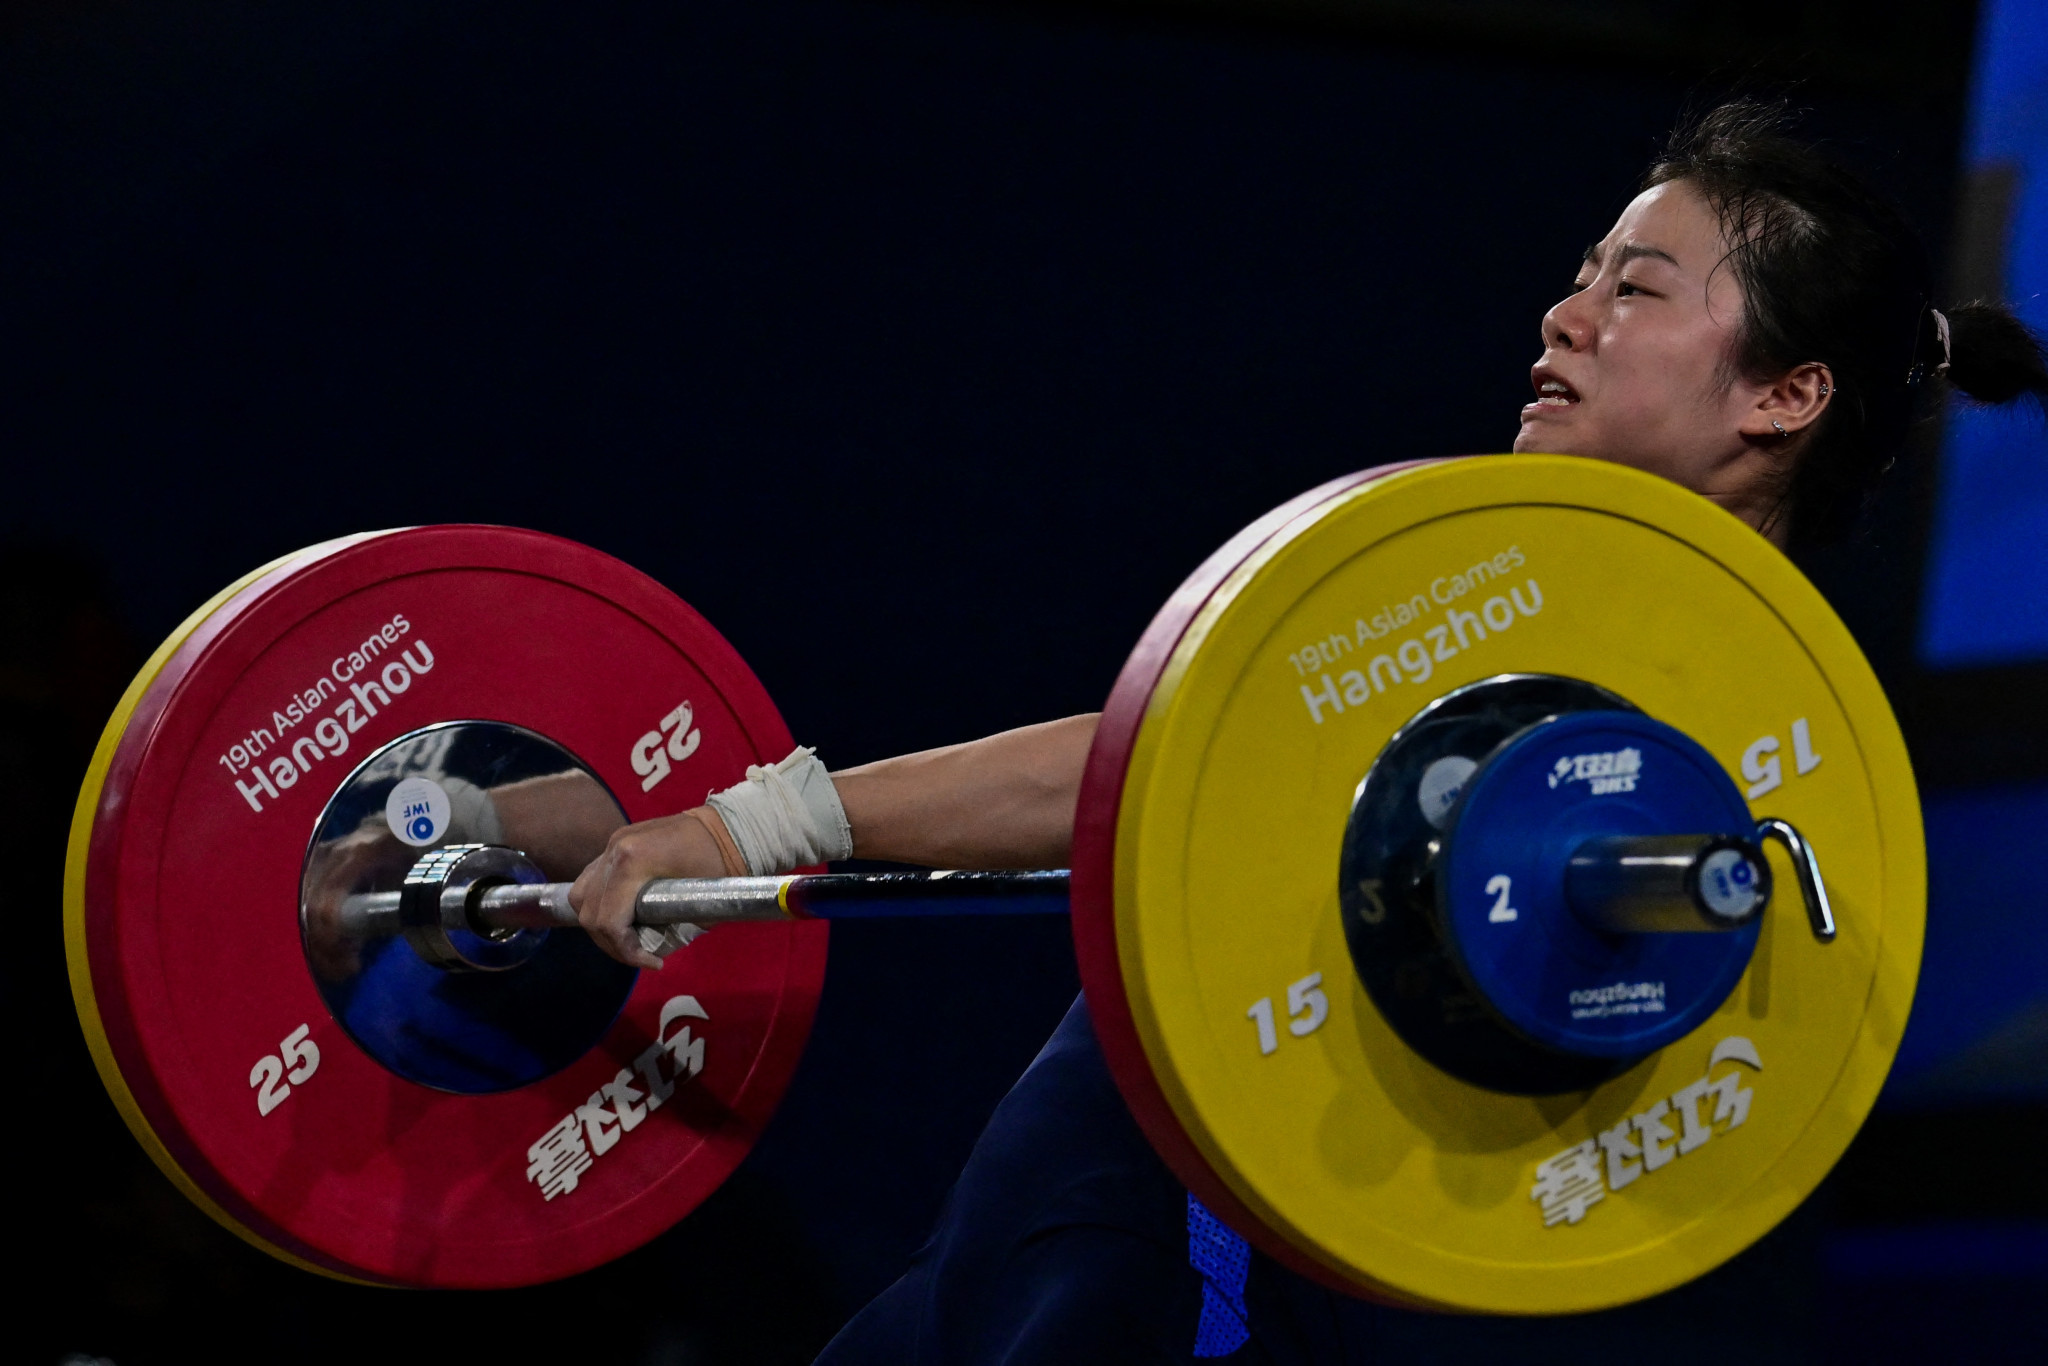 "PRK women are ahead of us now" says China weightlifting coach, after record-breaking performance at Asian Games 